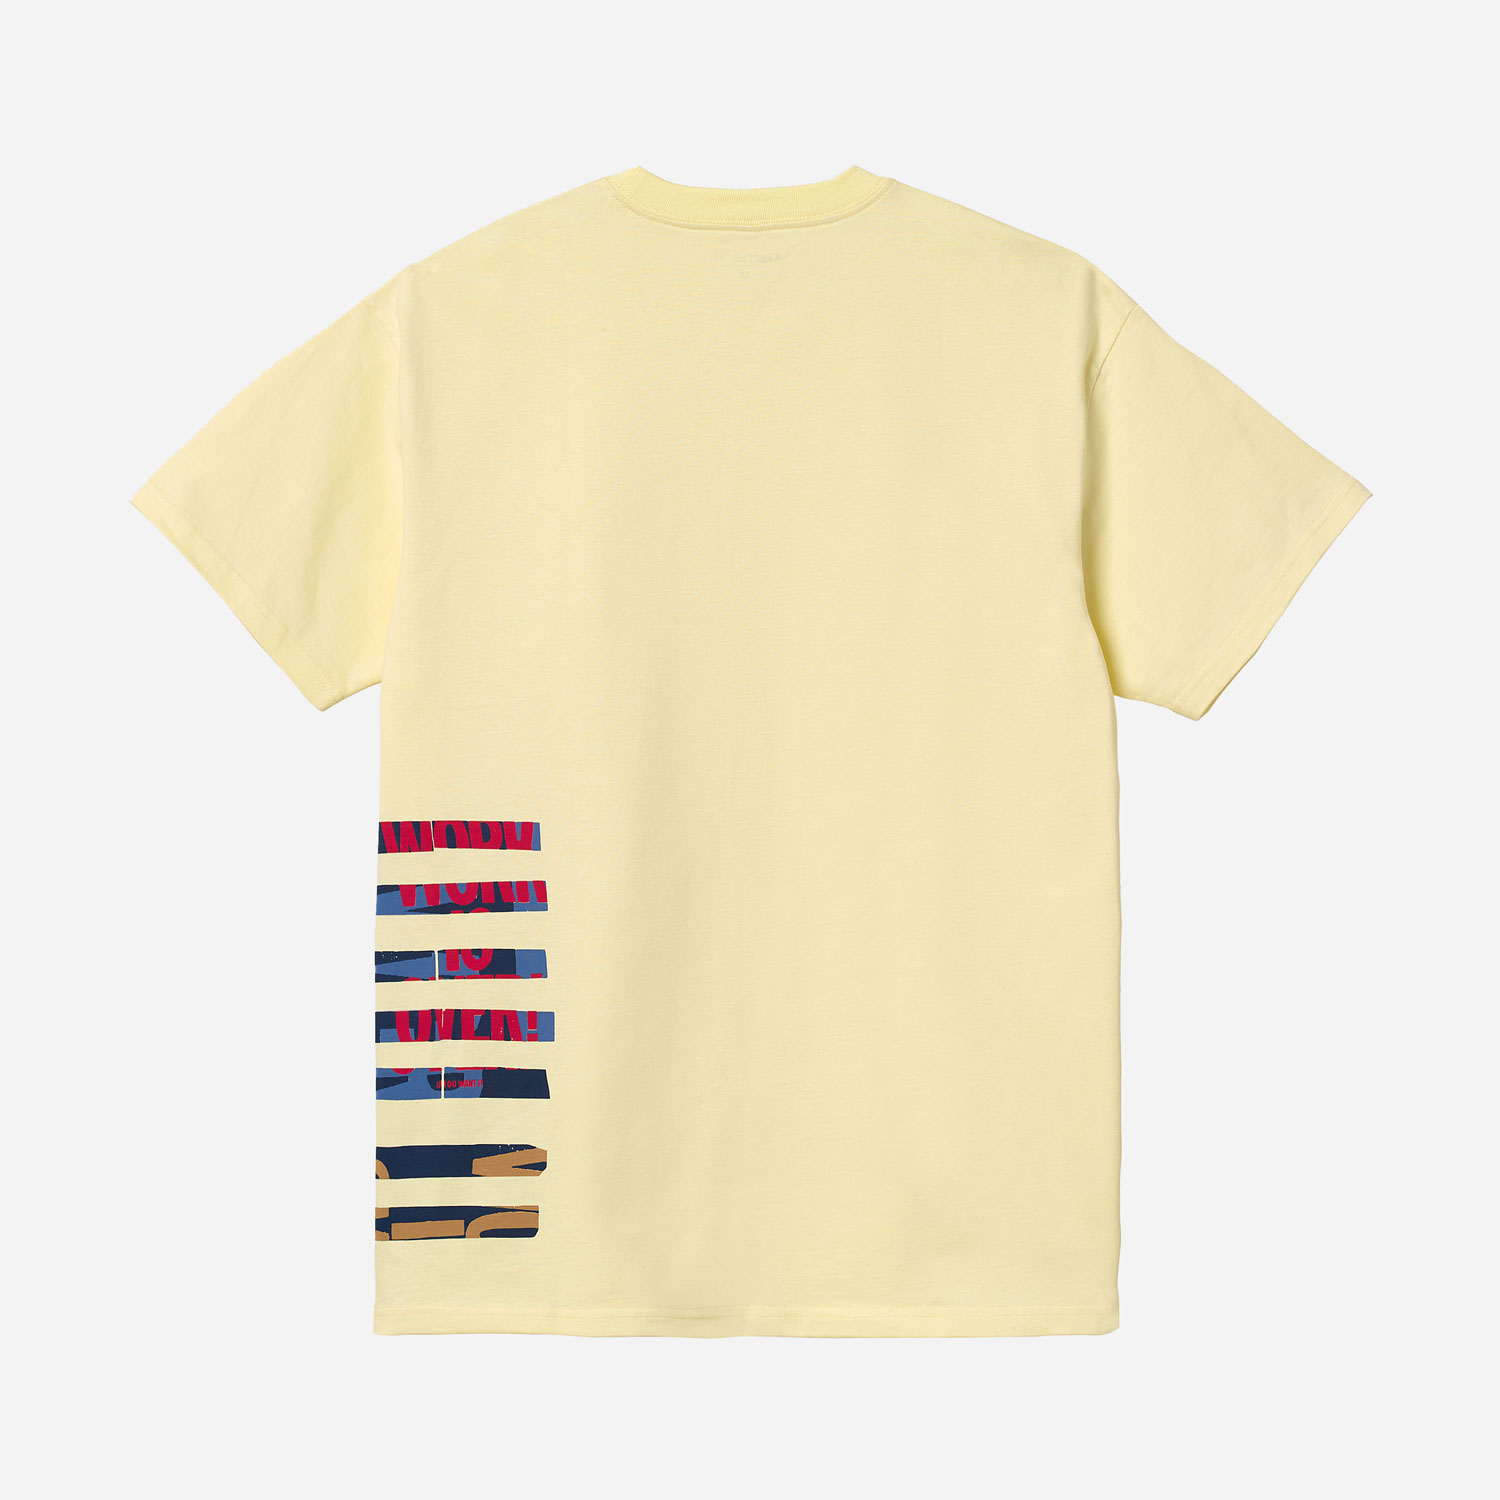 Carhartt Collage State Tee - Soft Yellow